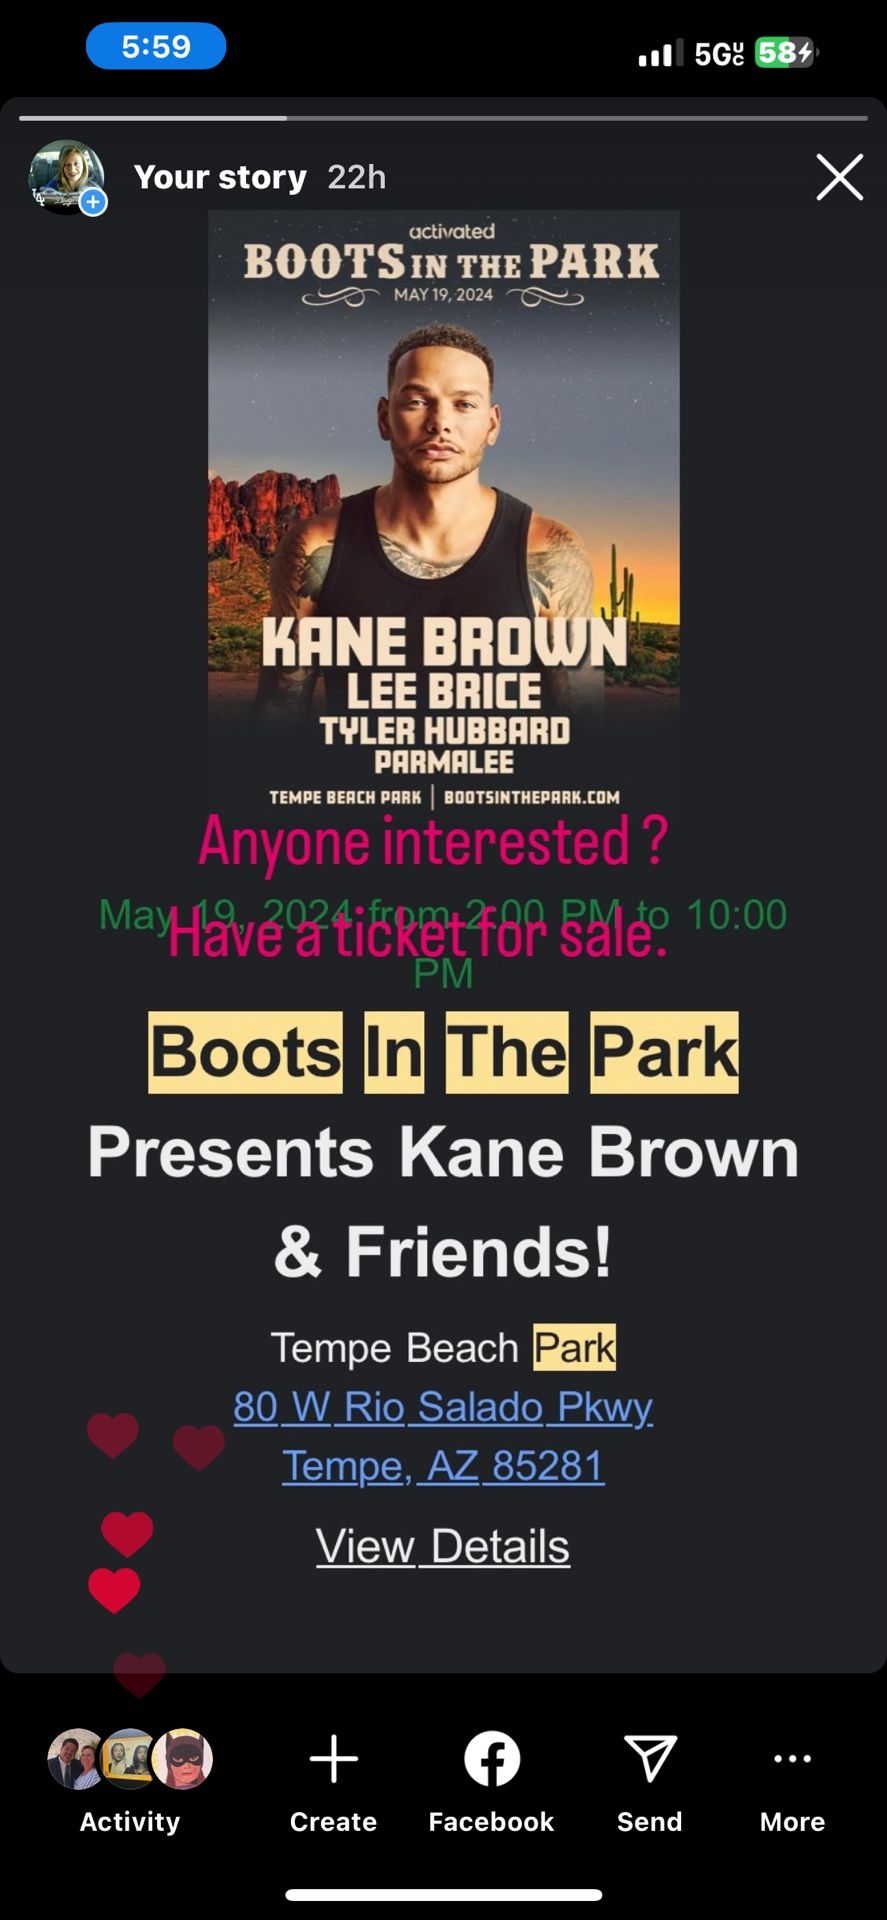 Boots In the Park   Kane Brown, Lee Brice, Tyler Hubbard & Friends!